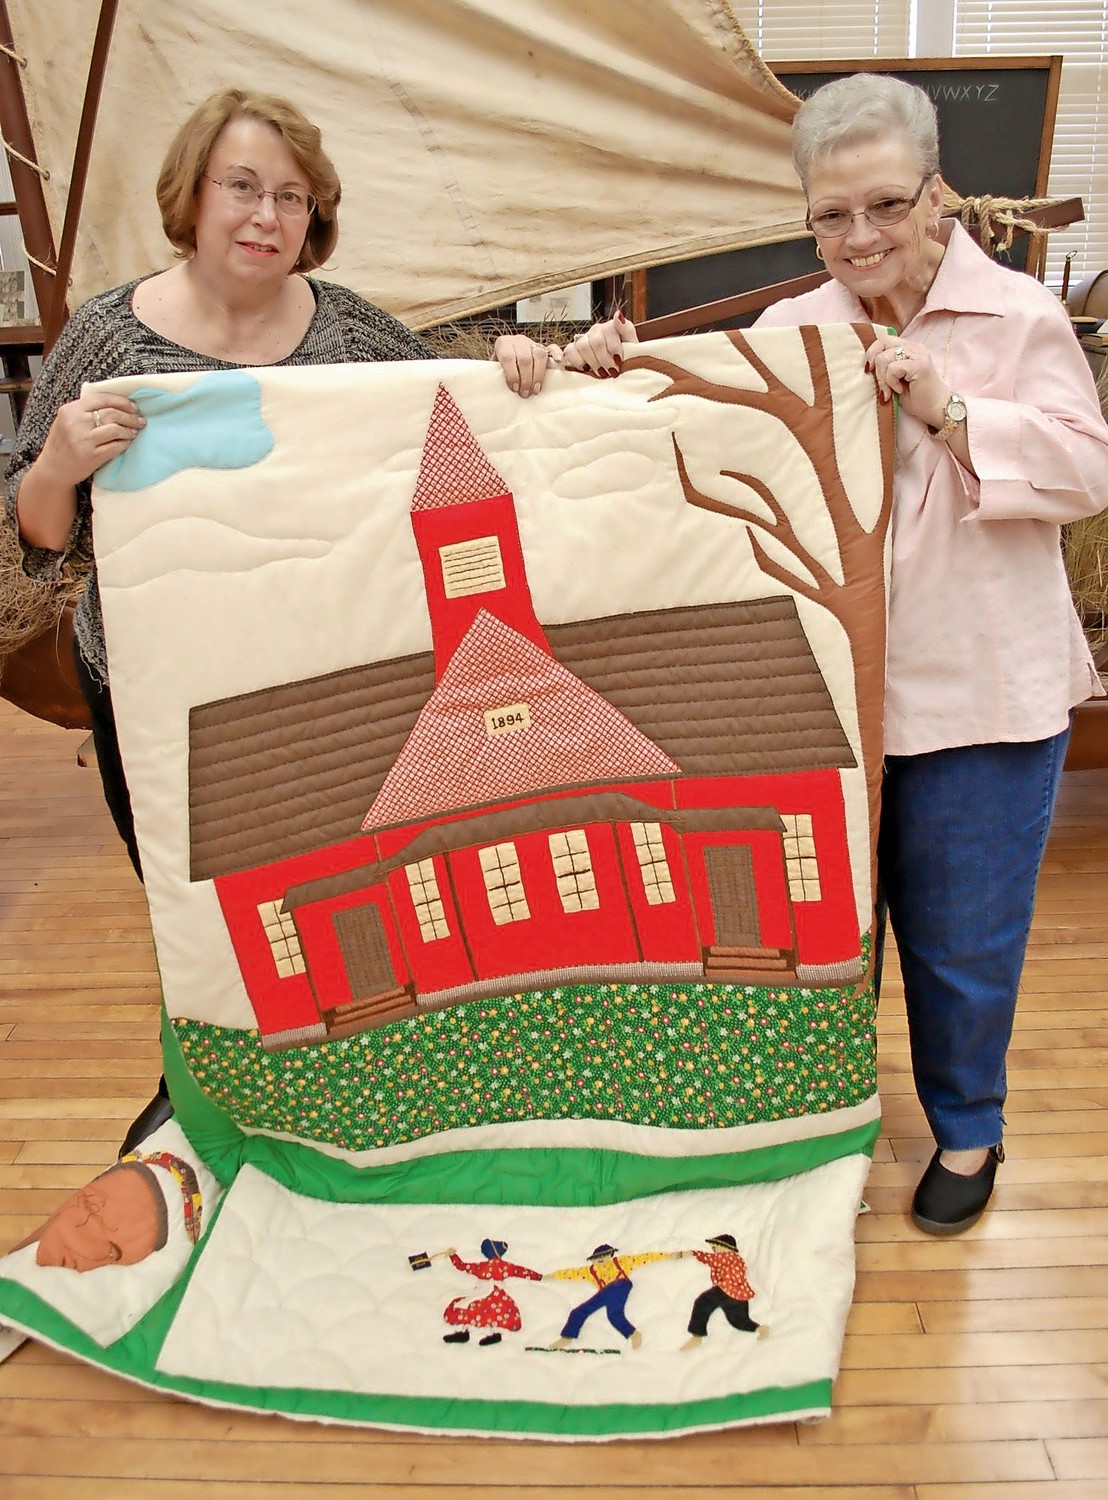 Bongiovi and past Chamber of Commerce President Carla Powell showed off a quilt made in the mid-1970s by 16 women in Seaford, depicting the former schoolhouse that now serves as the local history museum.